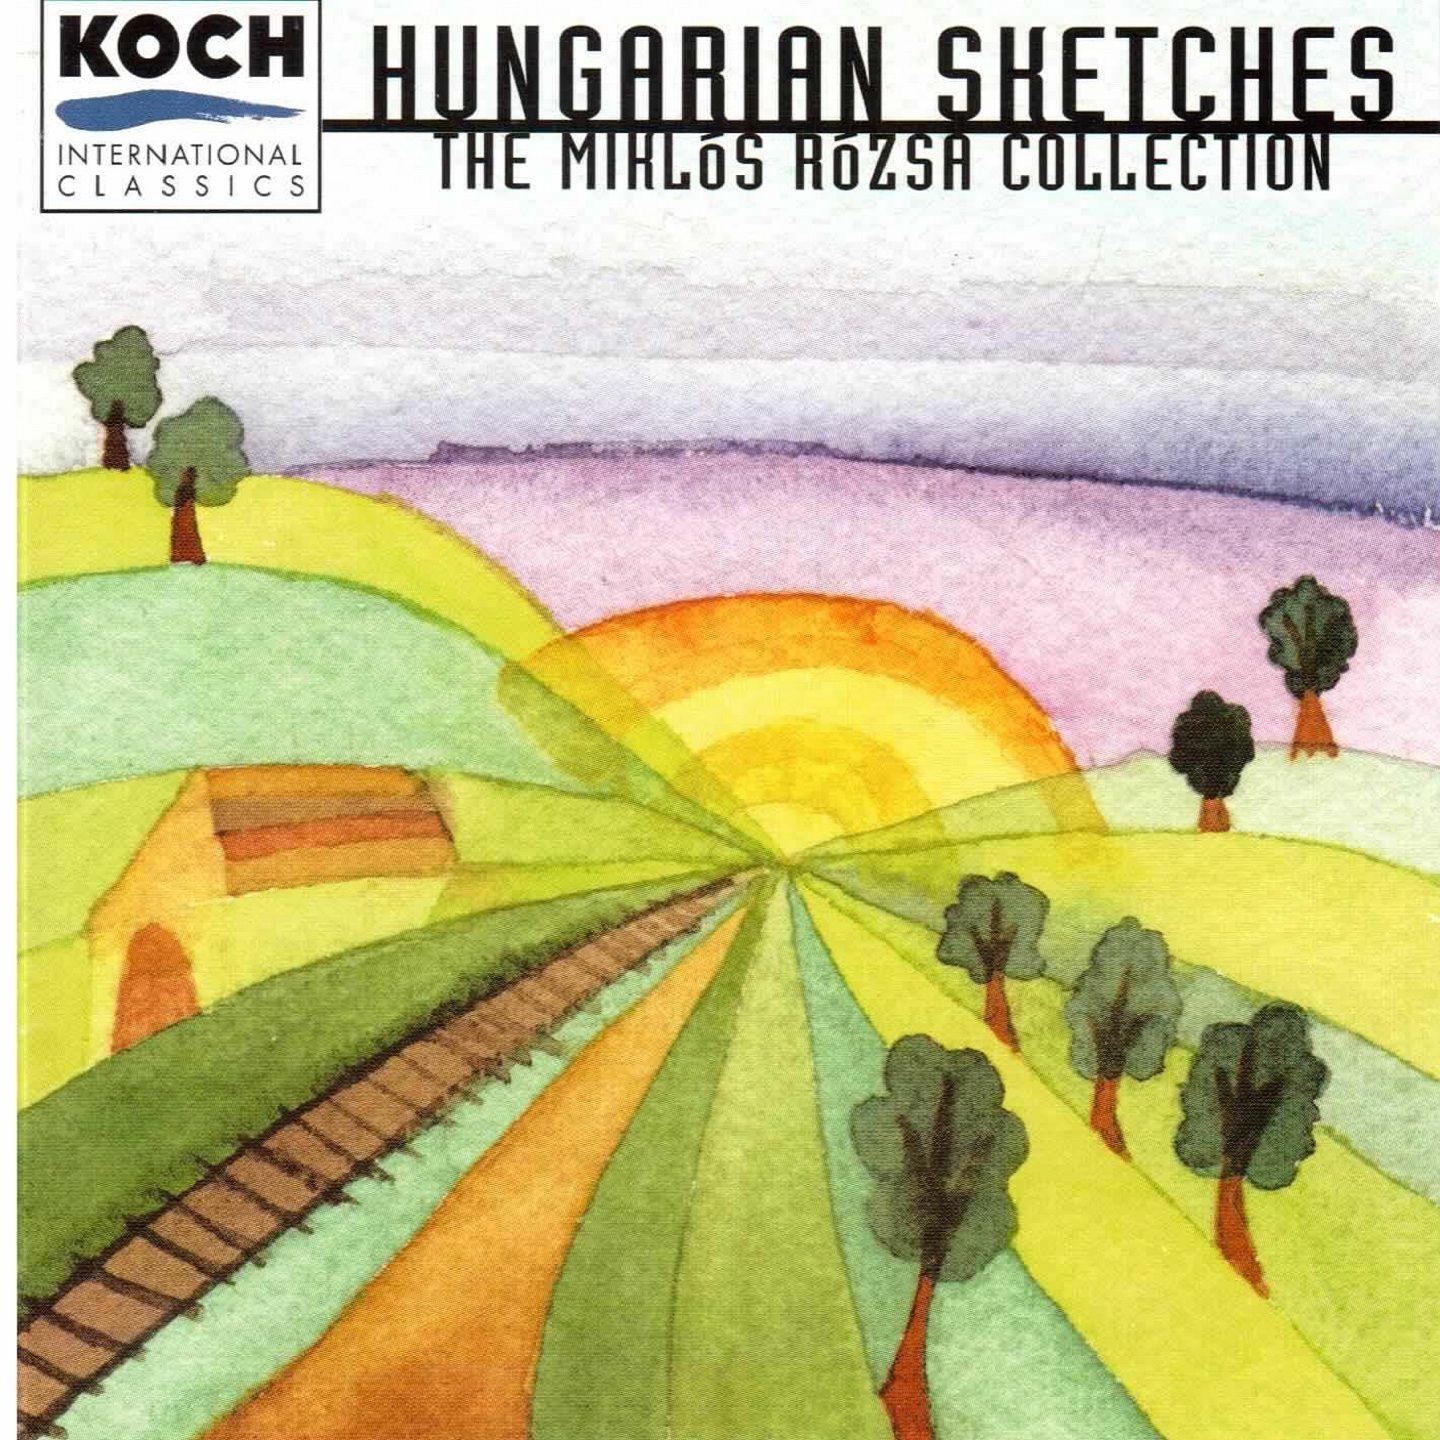 The Vinter's Daughter, 12 Variations on a French Folksong, Op. 23a: VII. Alla marcia hongarese